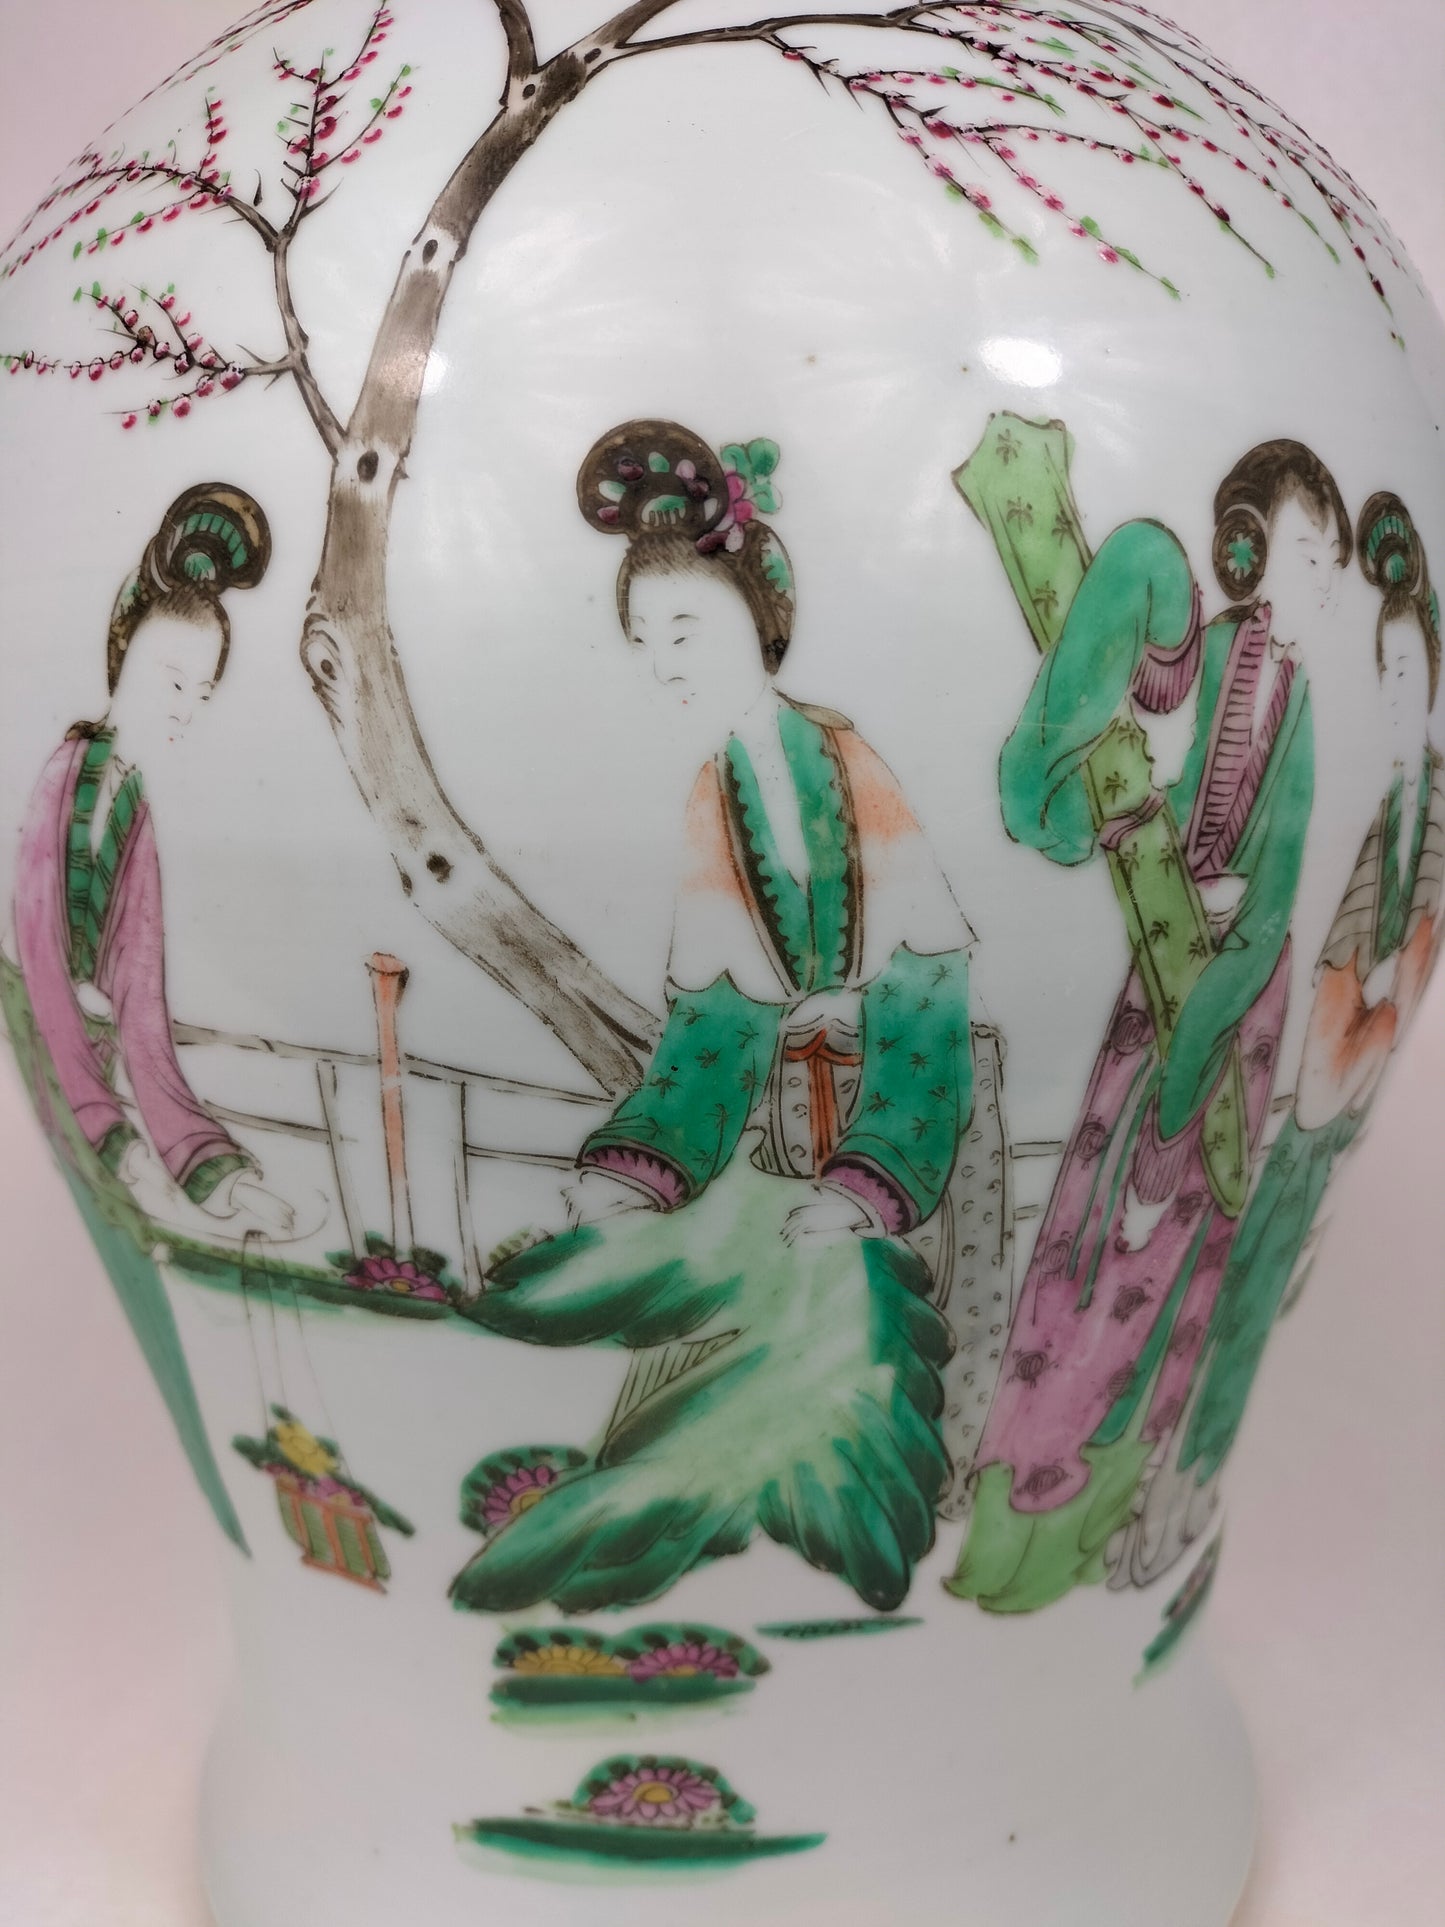 Antique Chinese temple vase decorated with a garden scene // Republic Period (1912-1949)